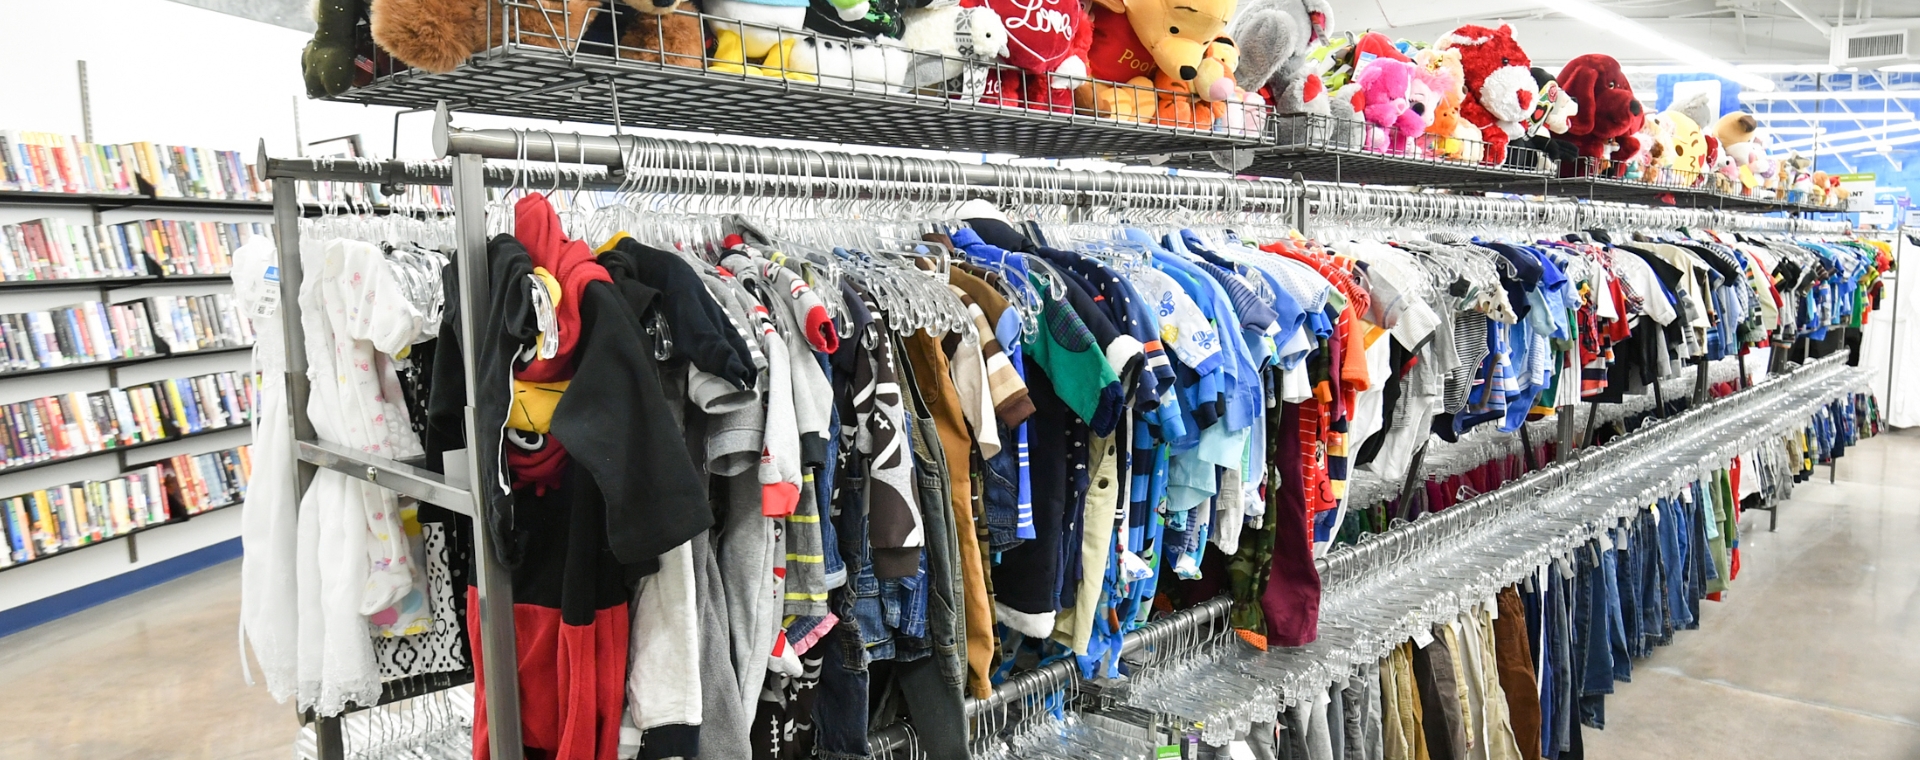 Racks of children clothing in a store